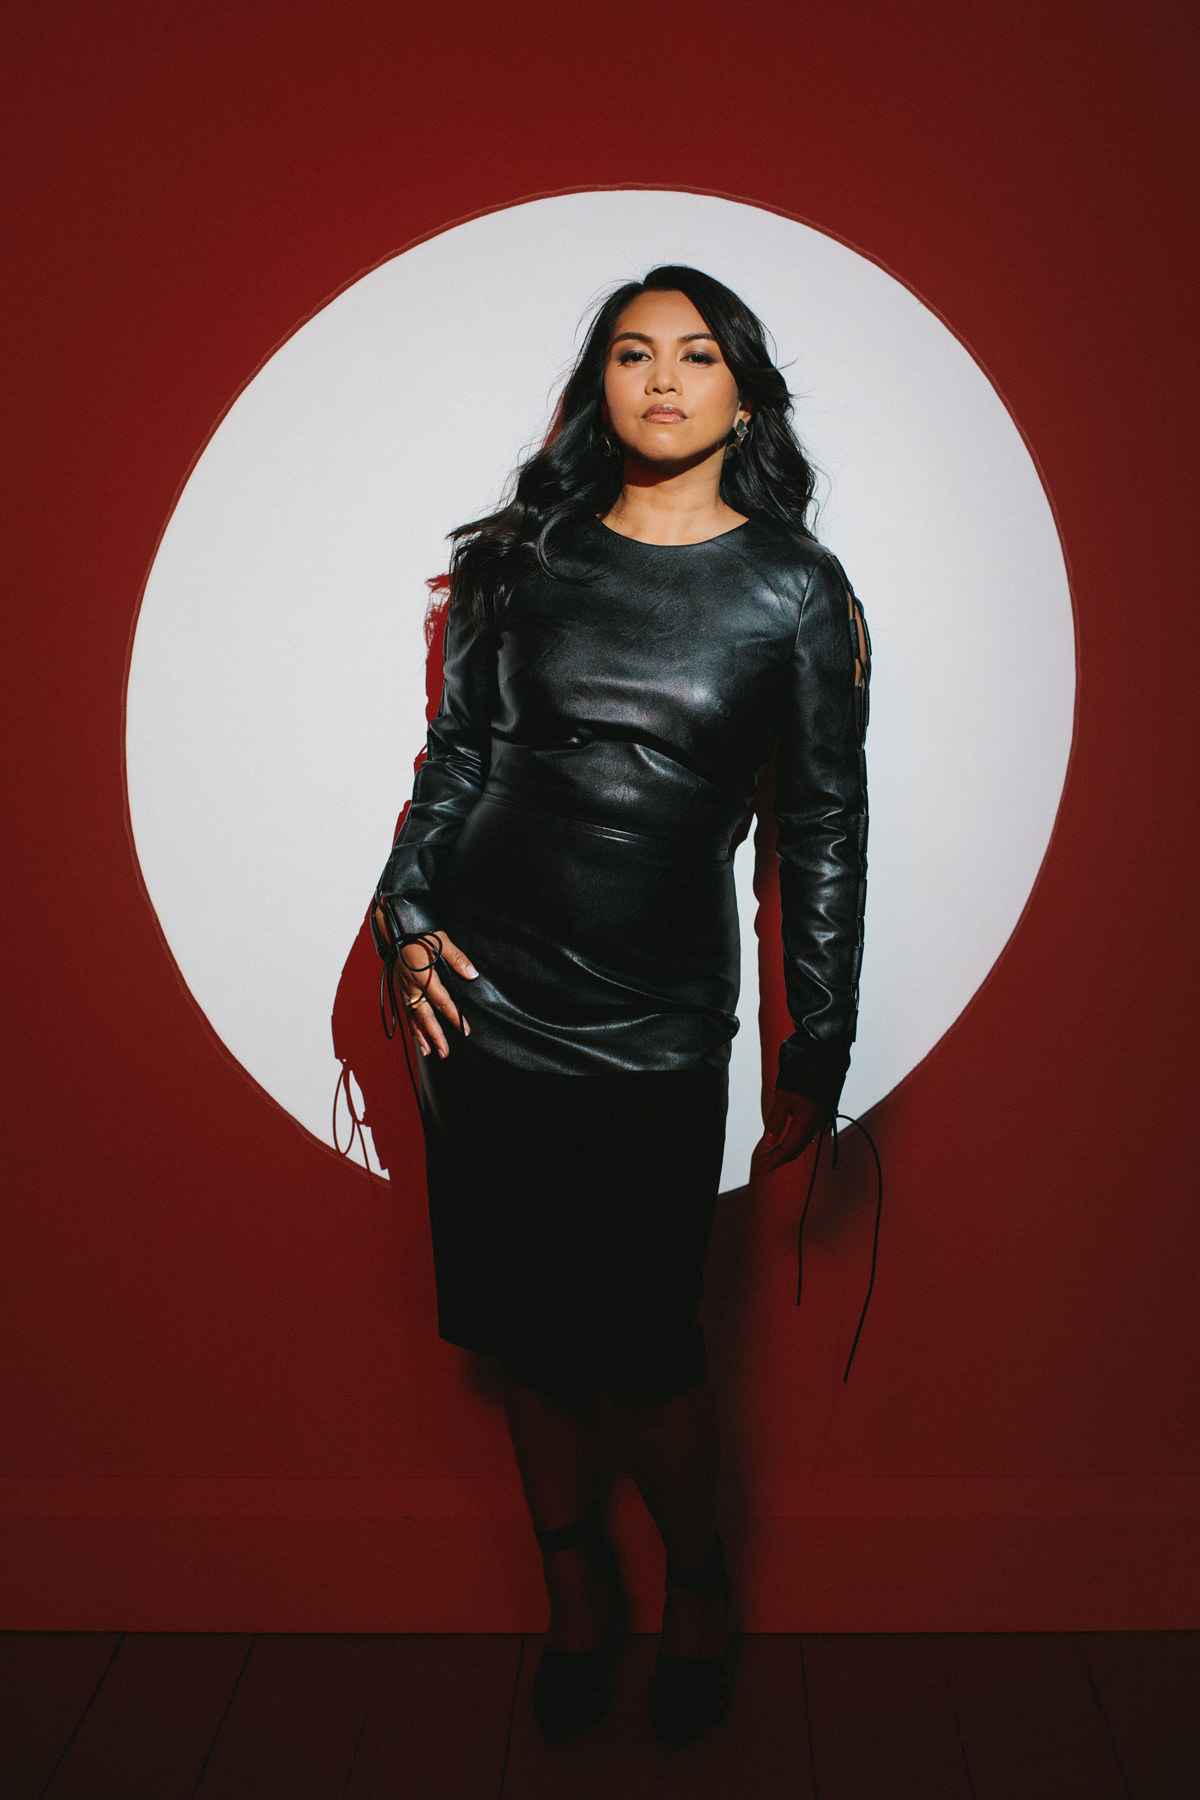 A creative portrait of a women in a black leather dress. She is standing in a white spotlight with red light shadows around her.